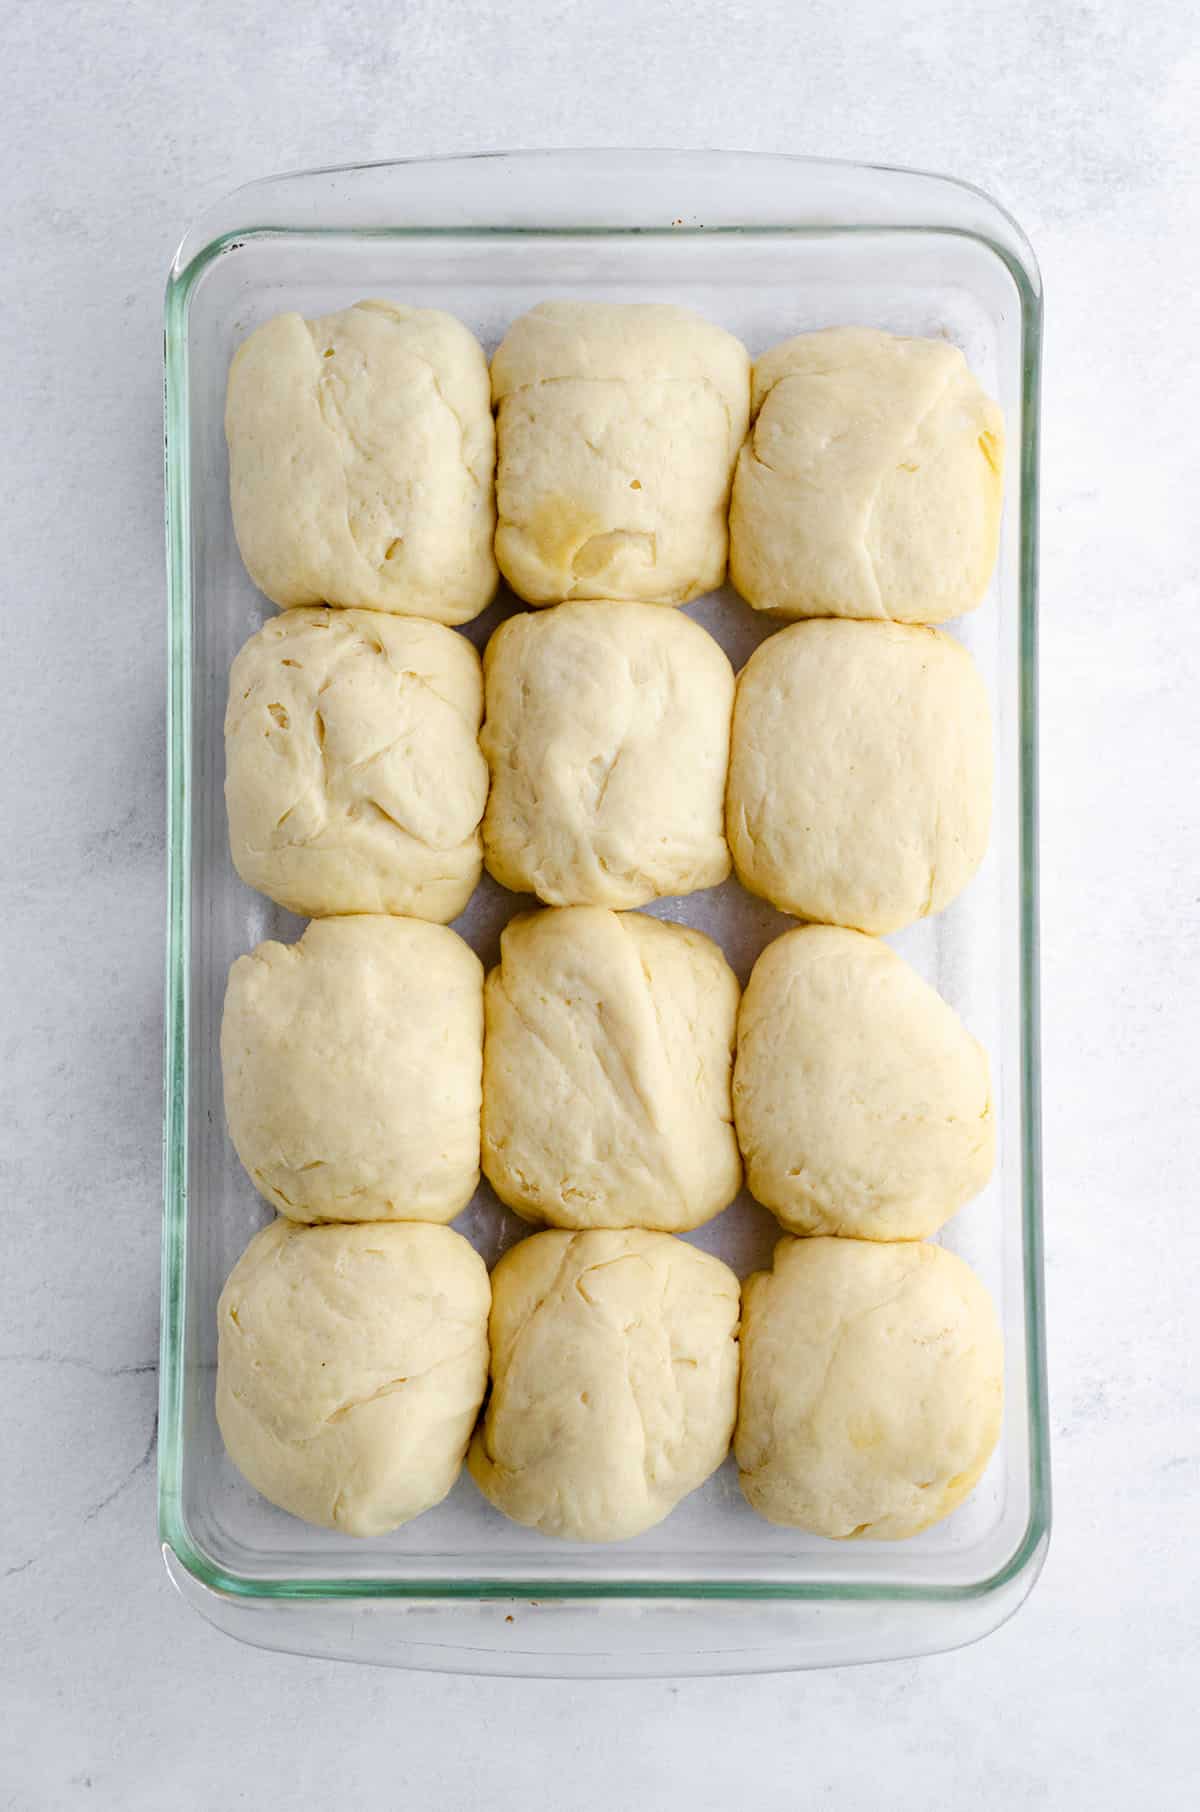 easy yeast roll dough in a glass baking dish ready to rise